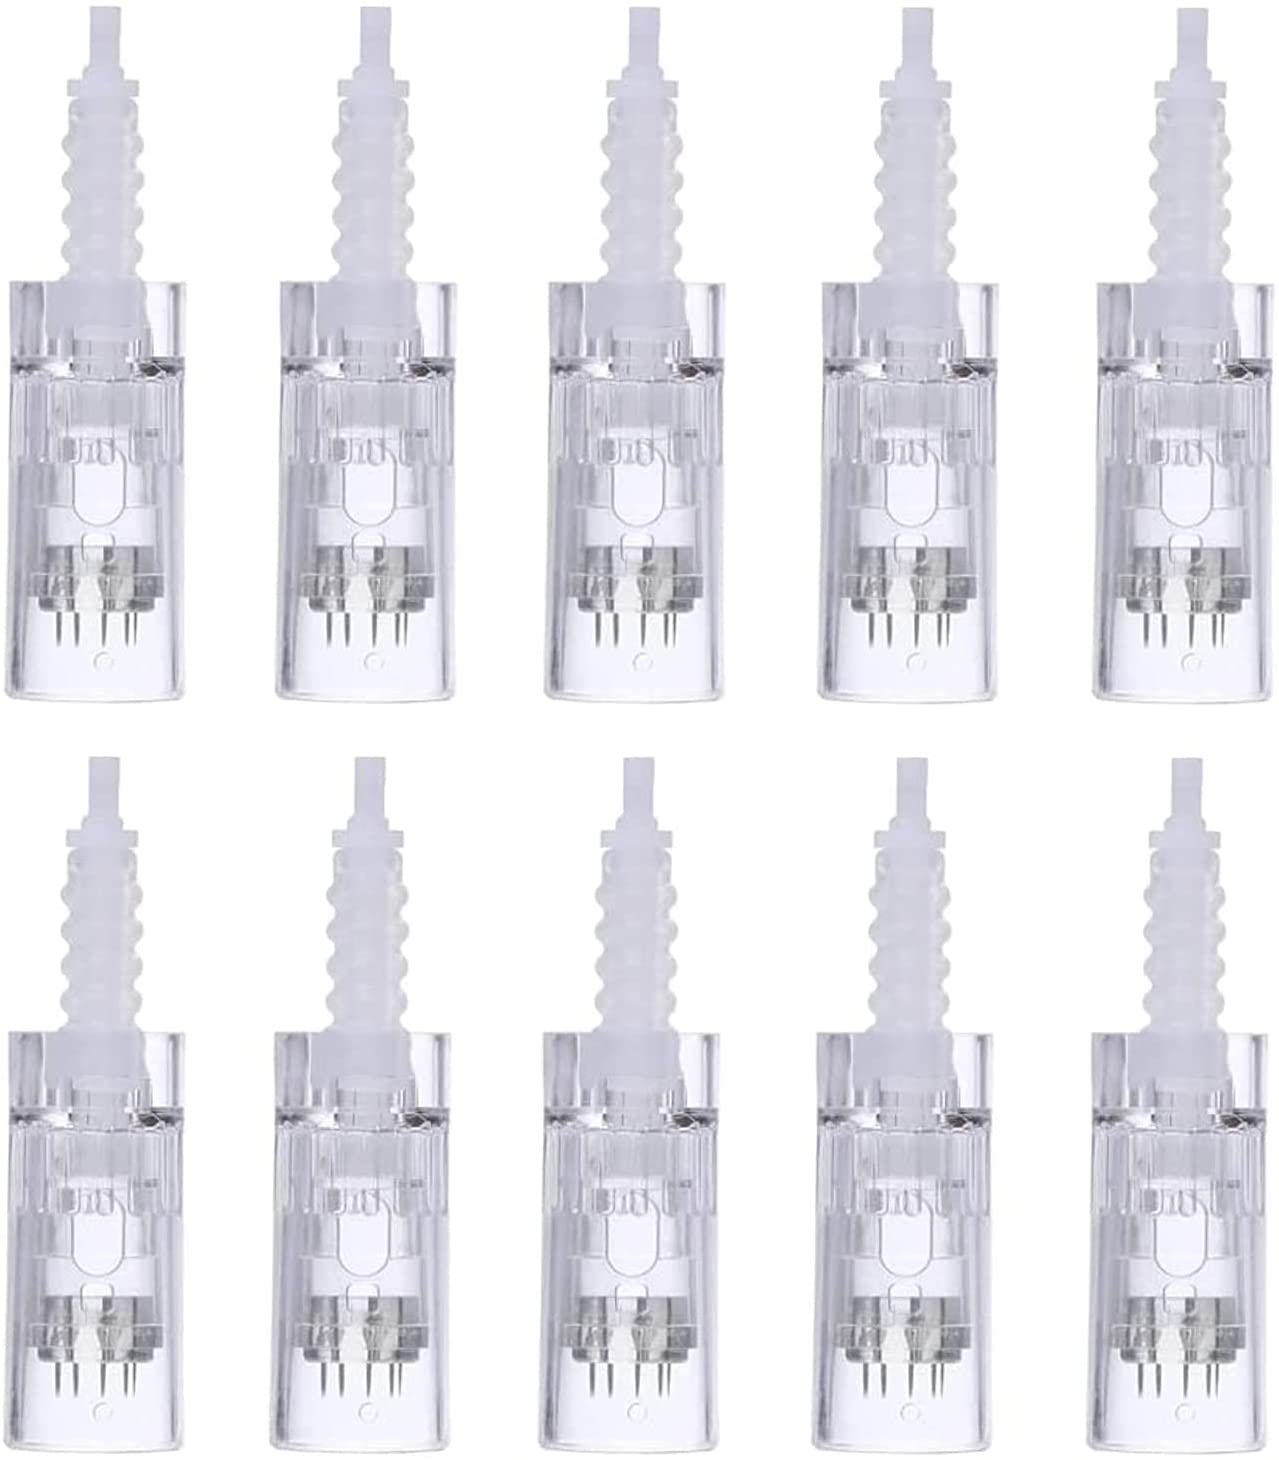 P-Beauty Cosmetic Accessories 24-Pin Needle Cartridges Replacement Needle Cartridges for Car Derma Electric Pen Microneedling Bayonet Closure for Dermapen Devices with Bayonet Port Pack of 10 (24-Pins)